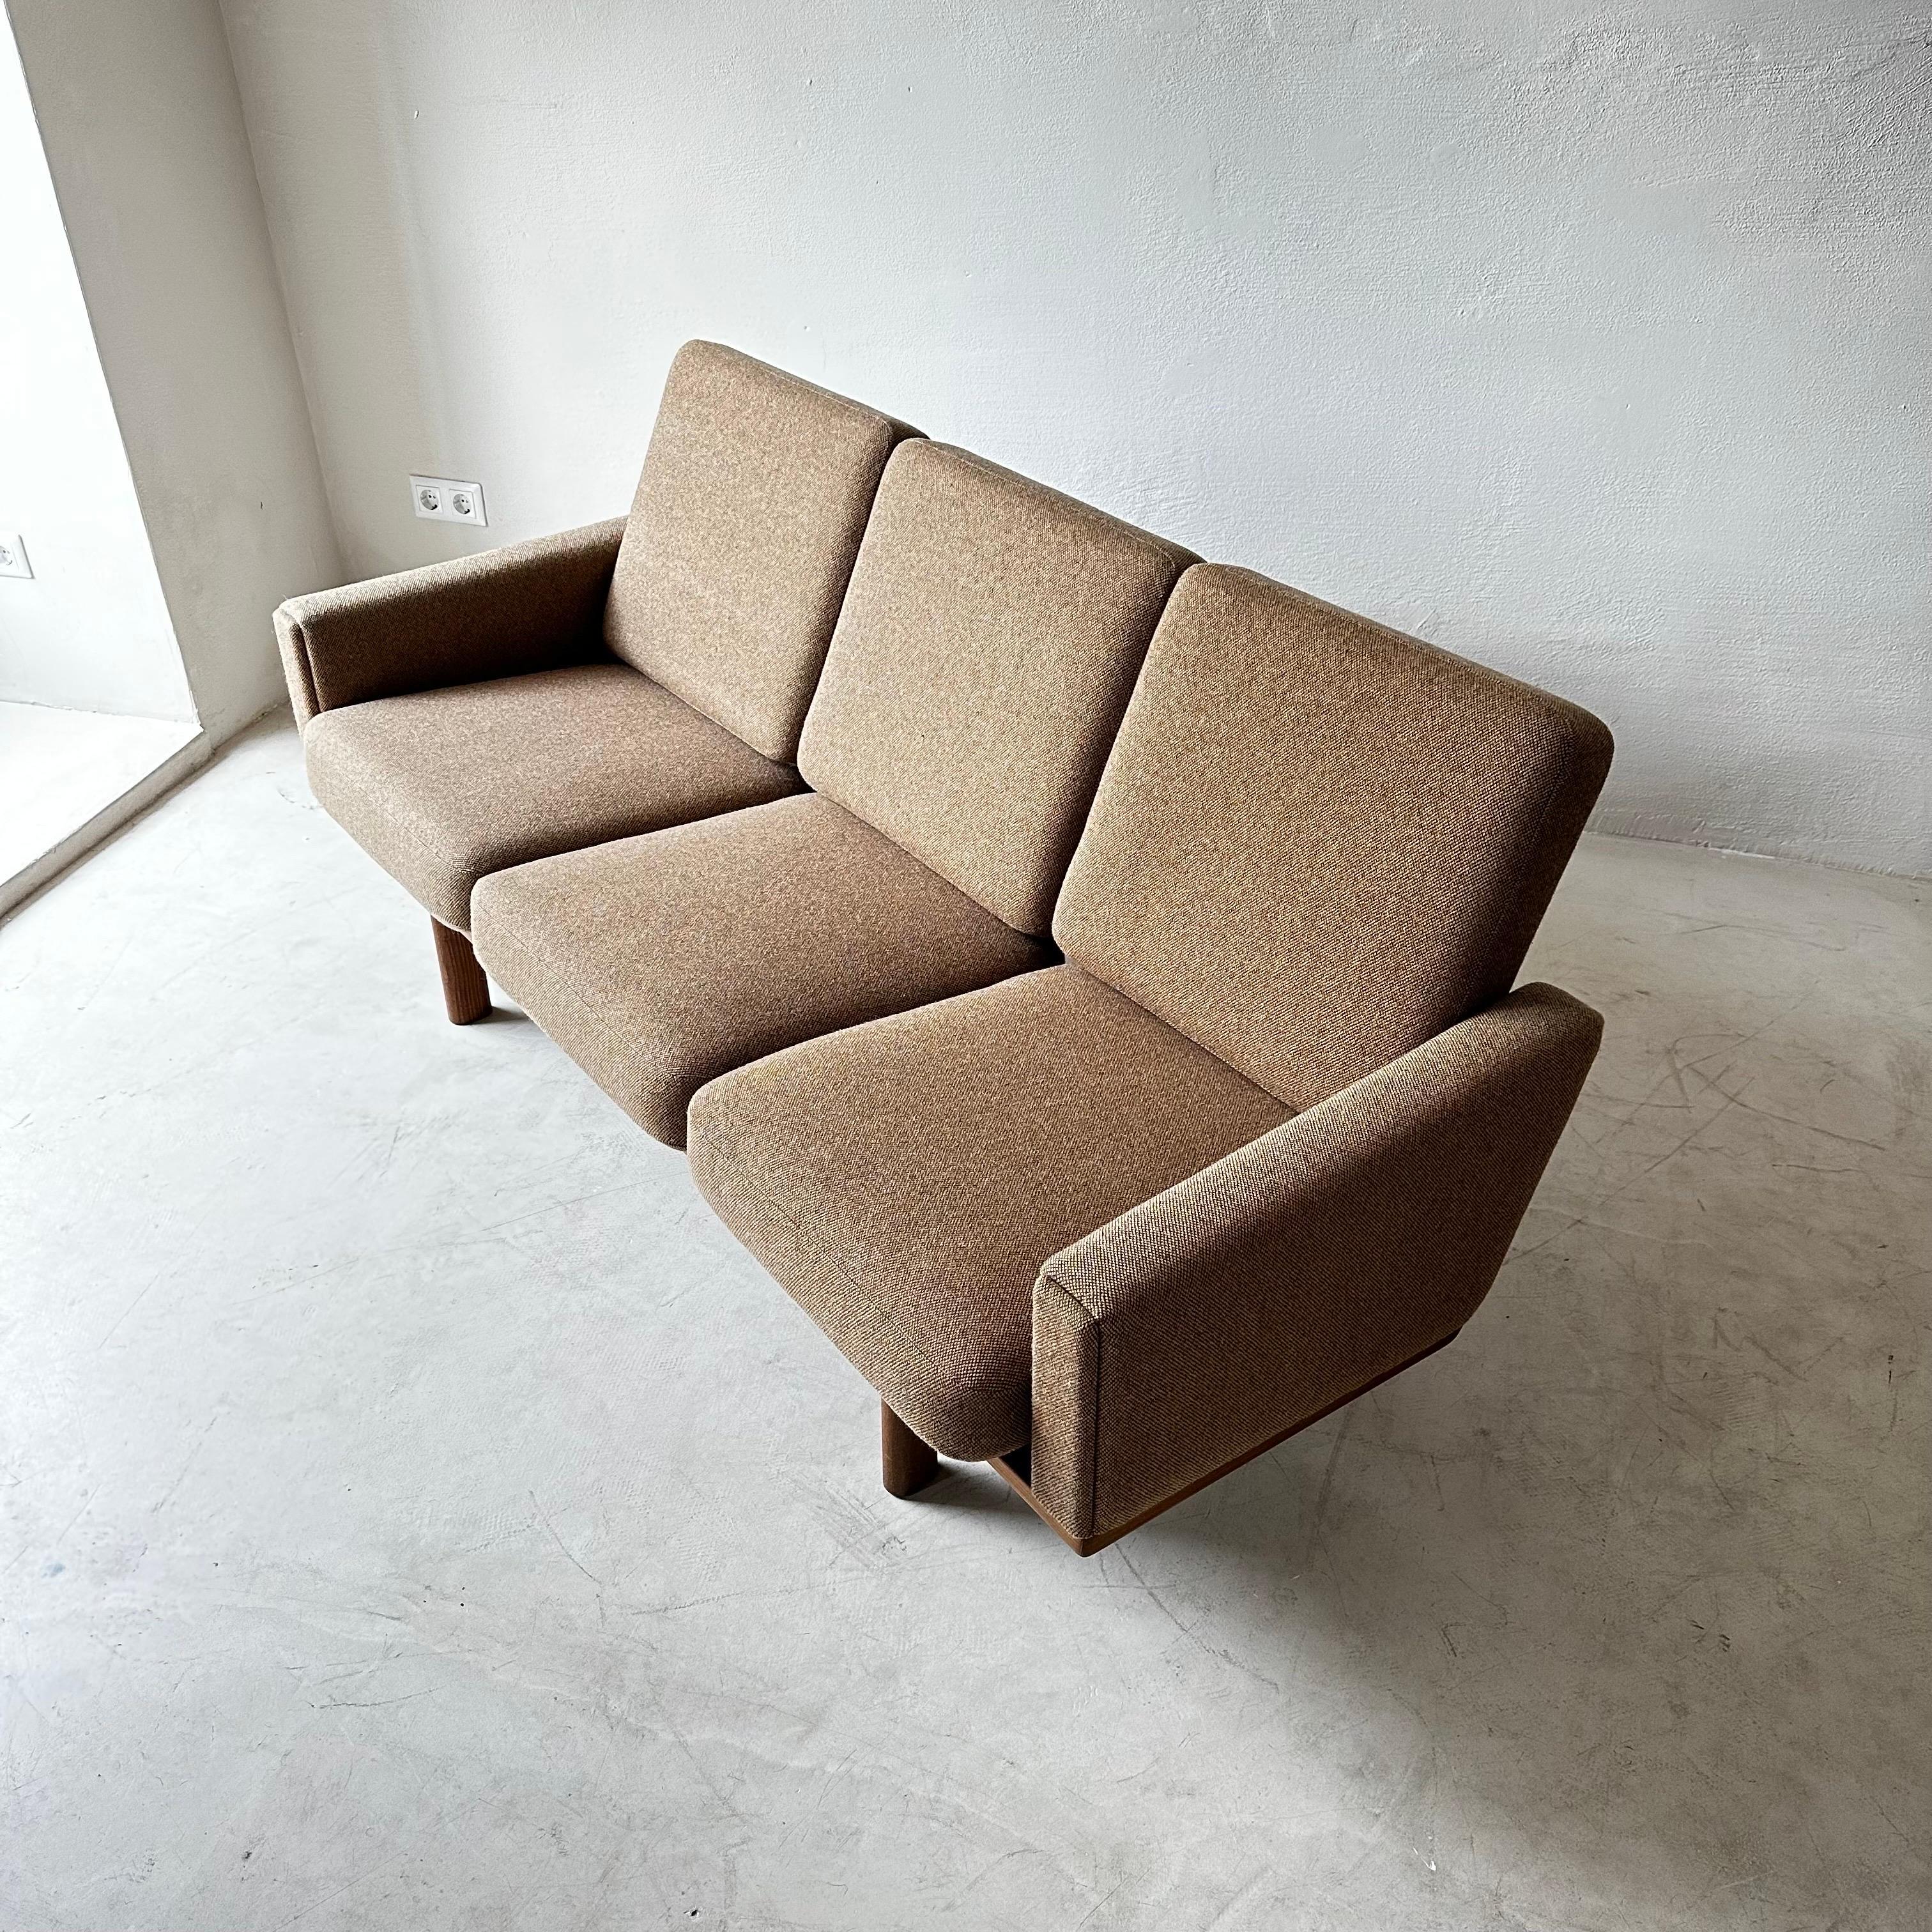 Three-Seat Teak-Framed Sofa, Model GE-236, by Hans Wegner for GETAMA In Good Condition For Sale In Vienna, AT